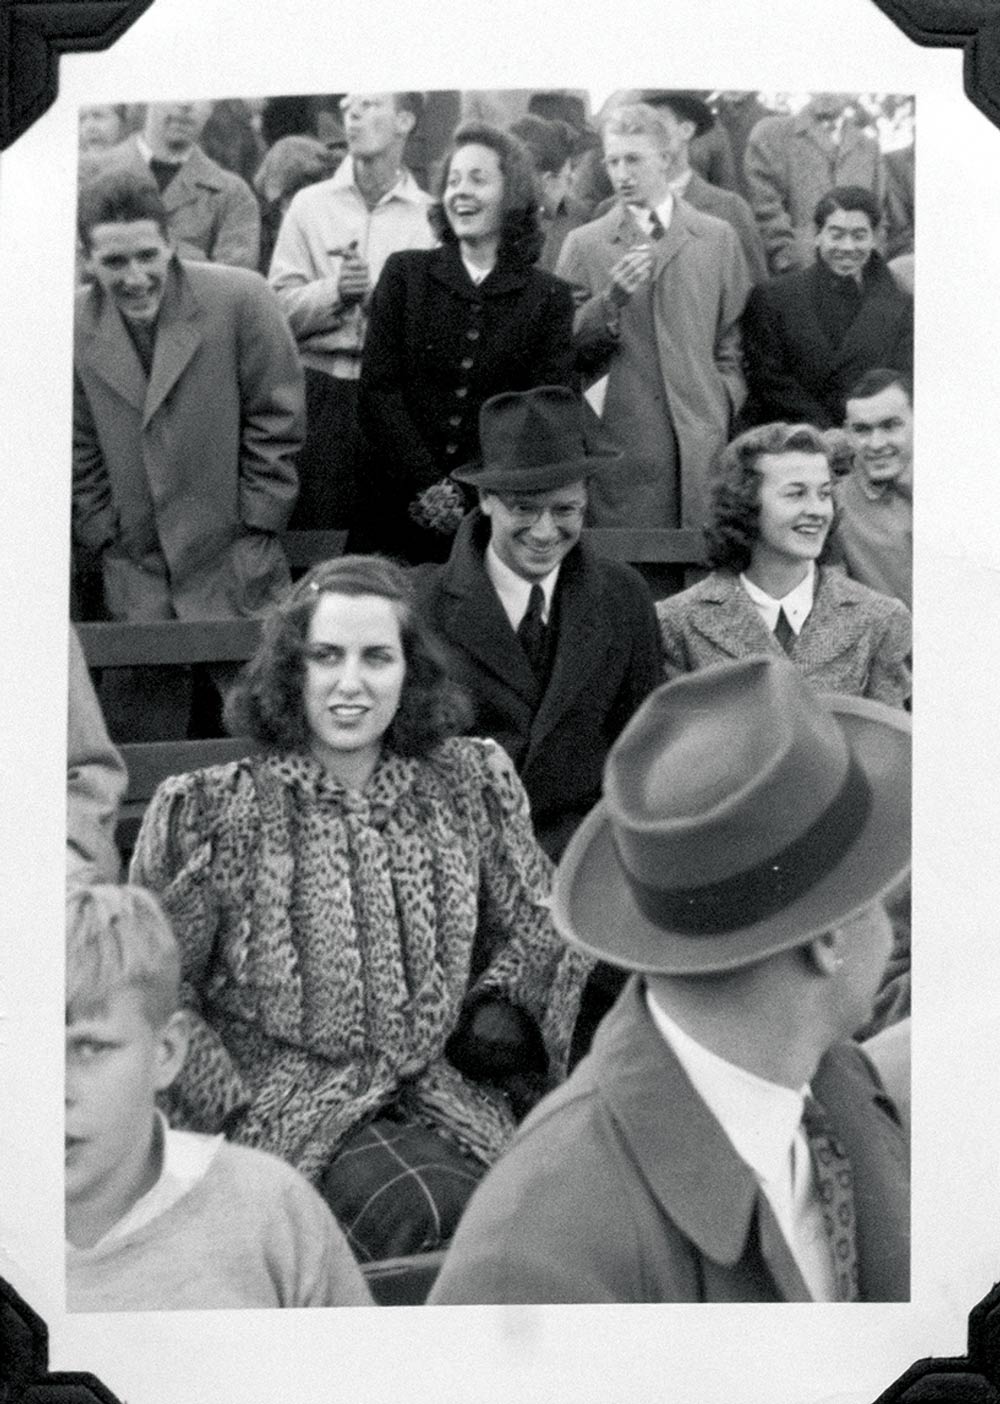 Lucy watching a football game, surrounded by fans in the stands